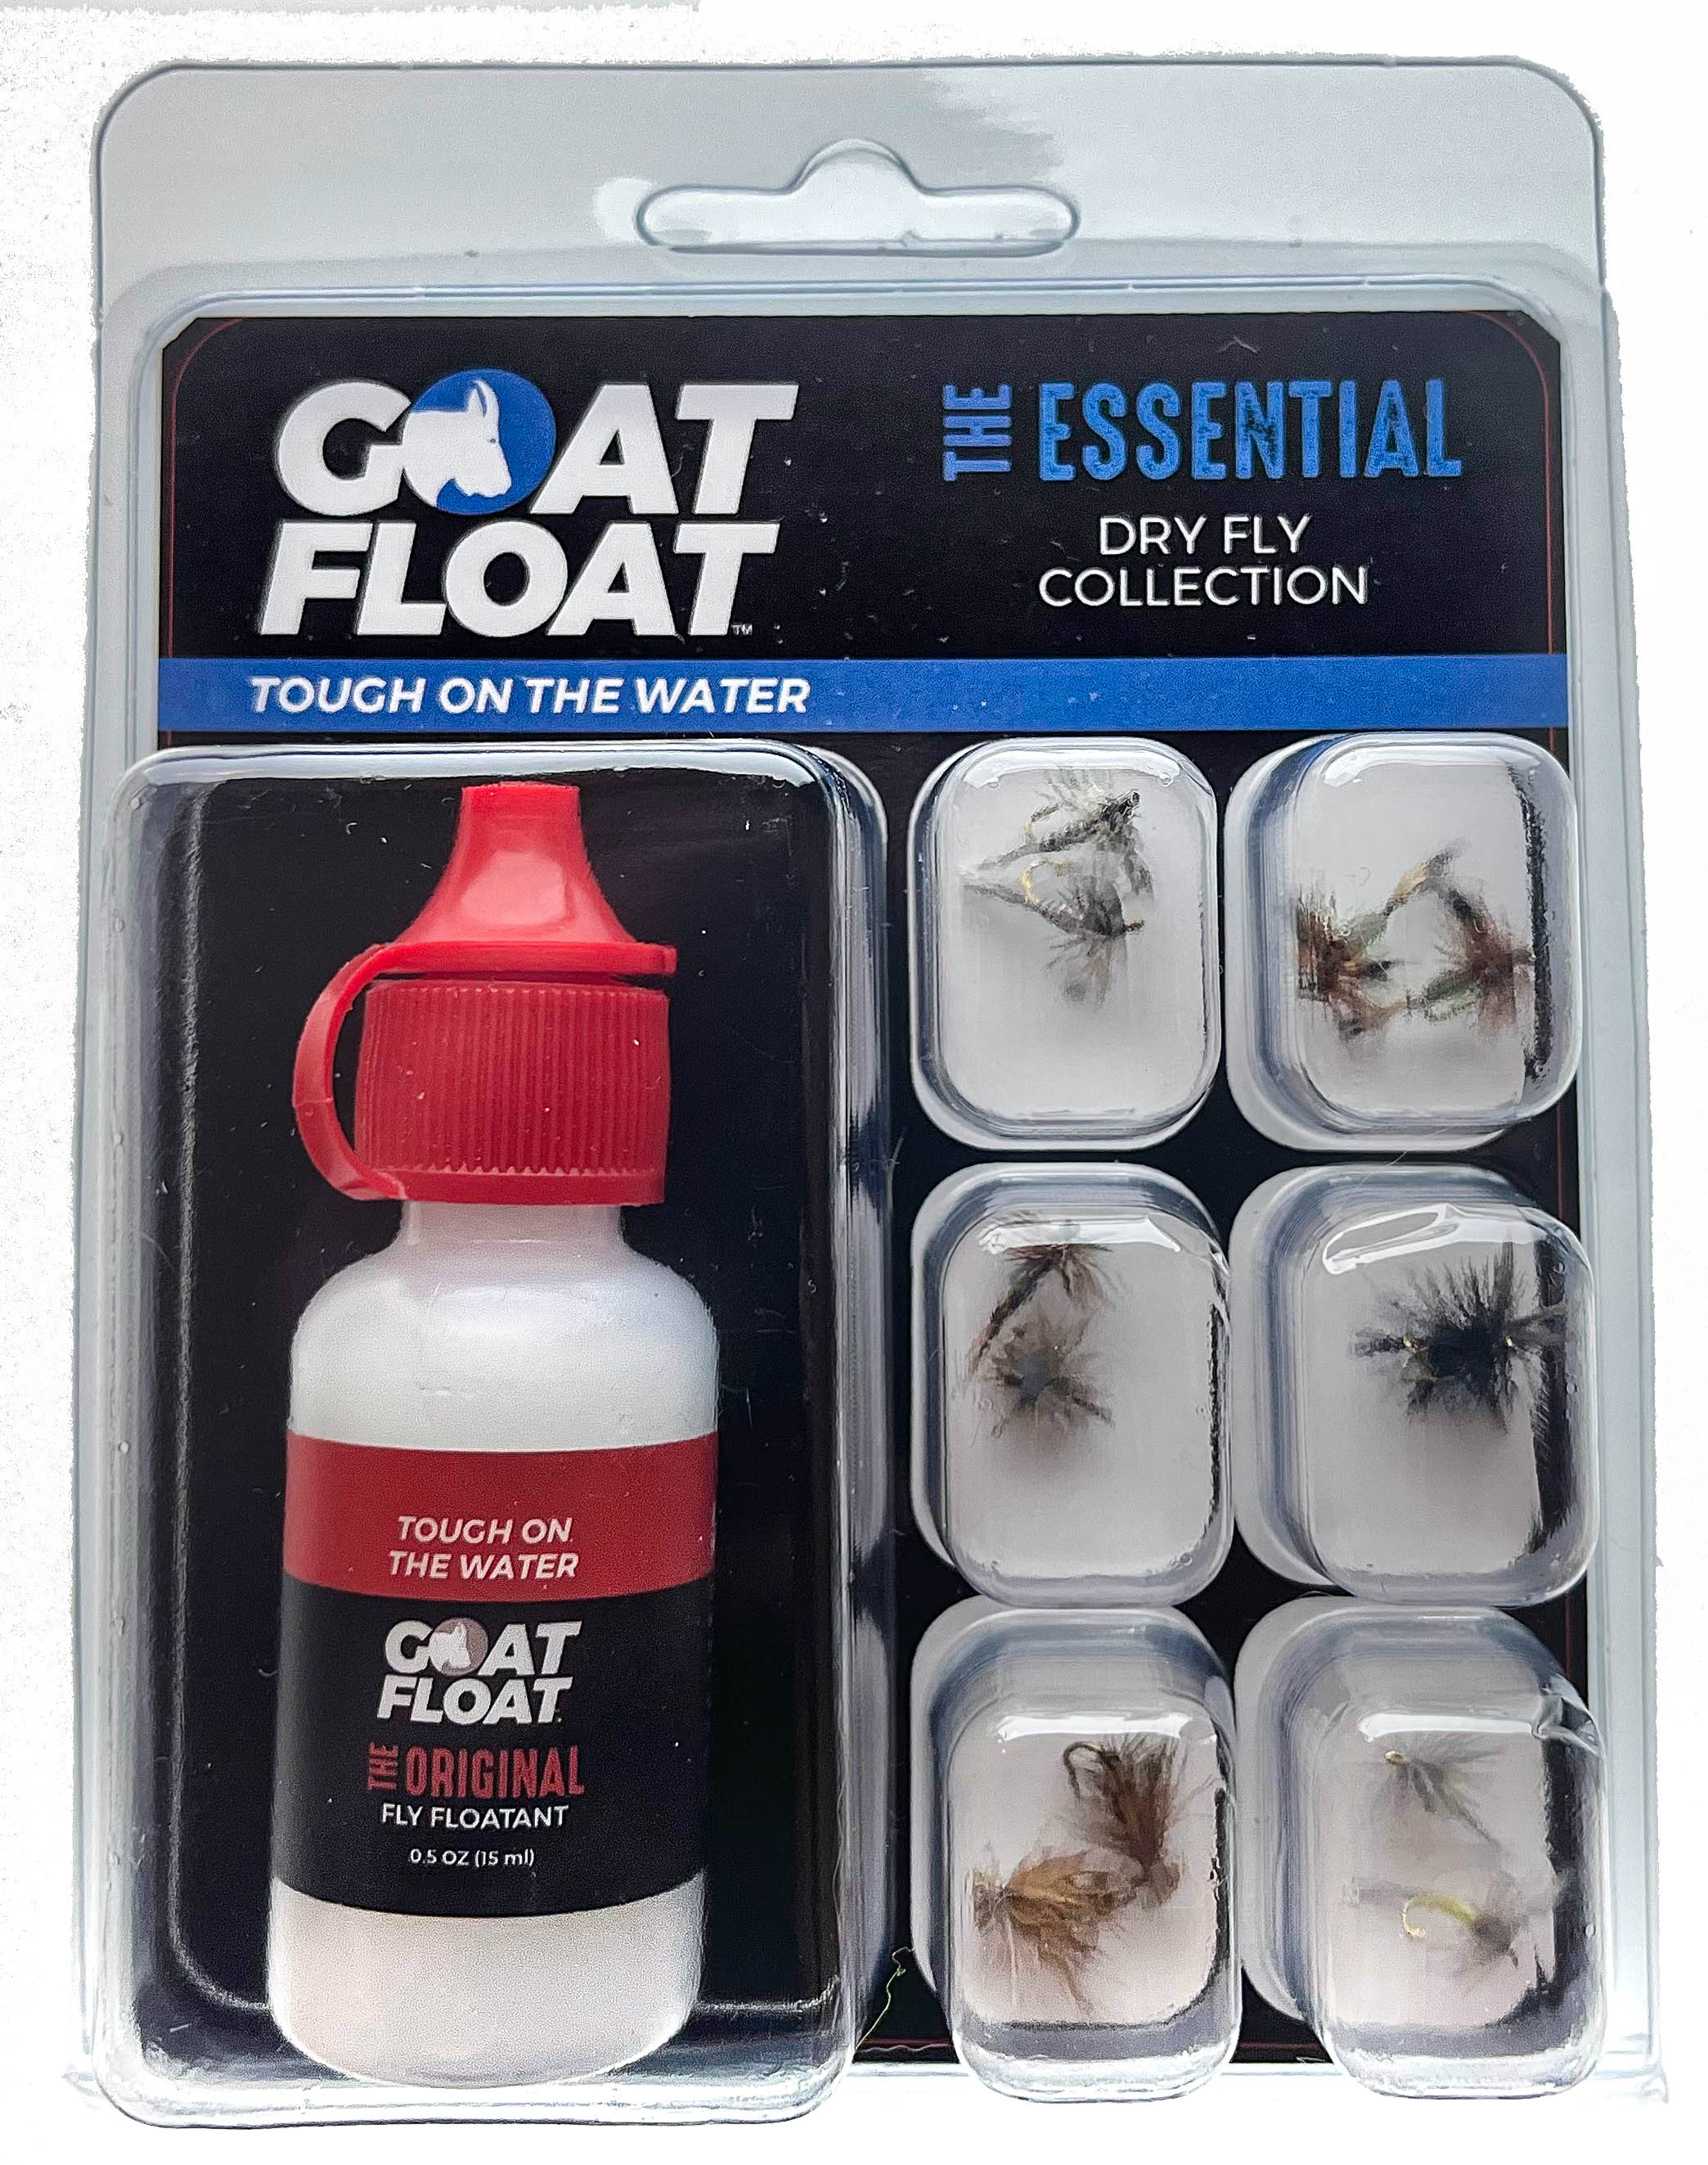 The Essential Dry Fly Collection - 12 Goat Float Flies, 5X Leader, & The  Original Dry Fly Floatant Included